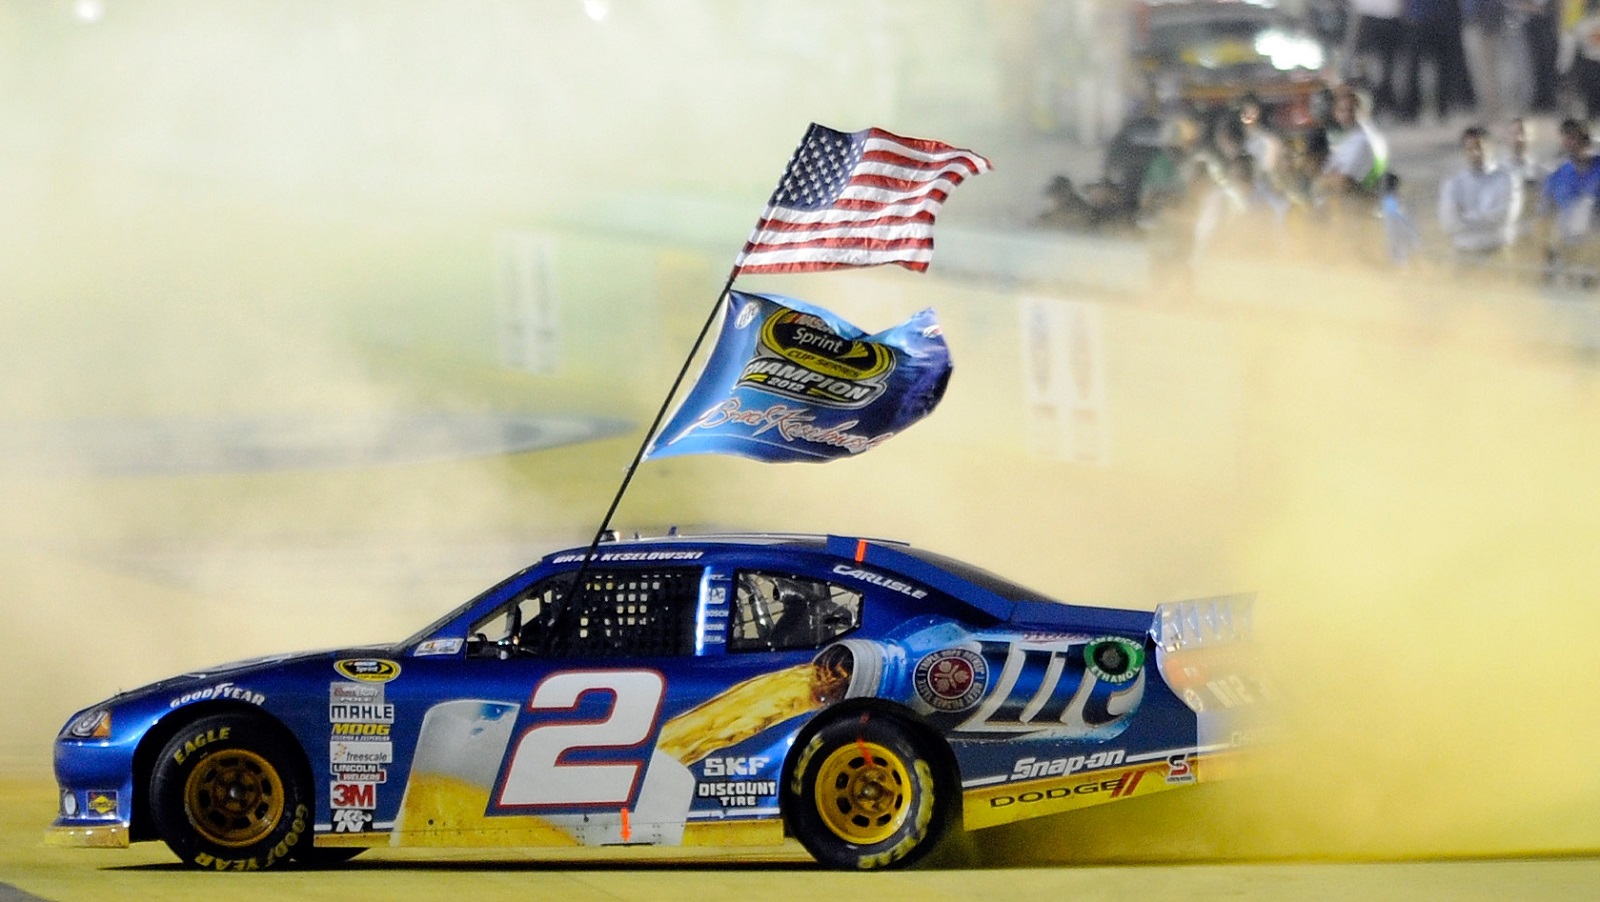 Brad Keselowski of Team Penske celebrates with a burnout after winning the NASCAR Cup Series championship at Homestead-Miami Speedway on Nov. 18, 2012, in the final race for Dodge.